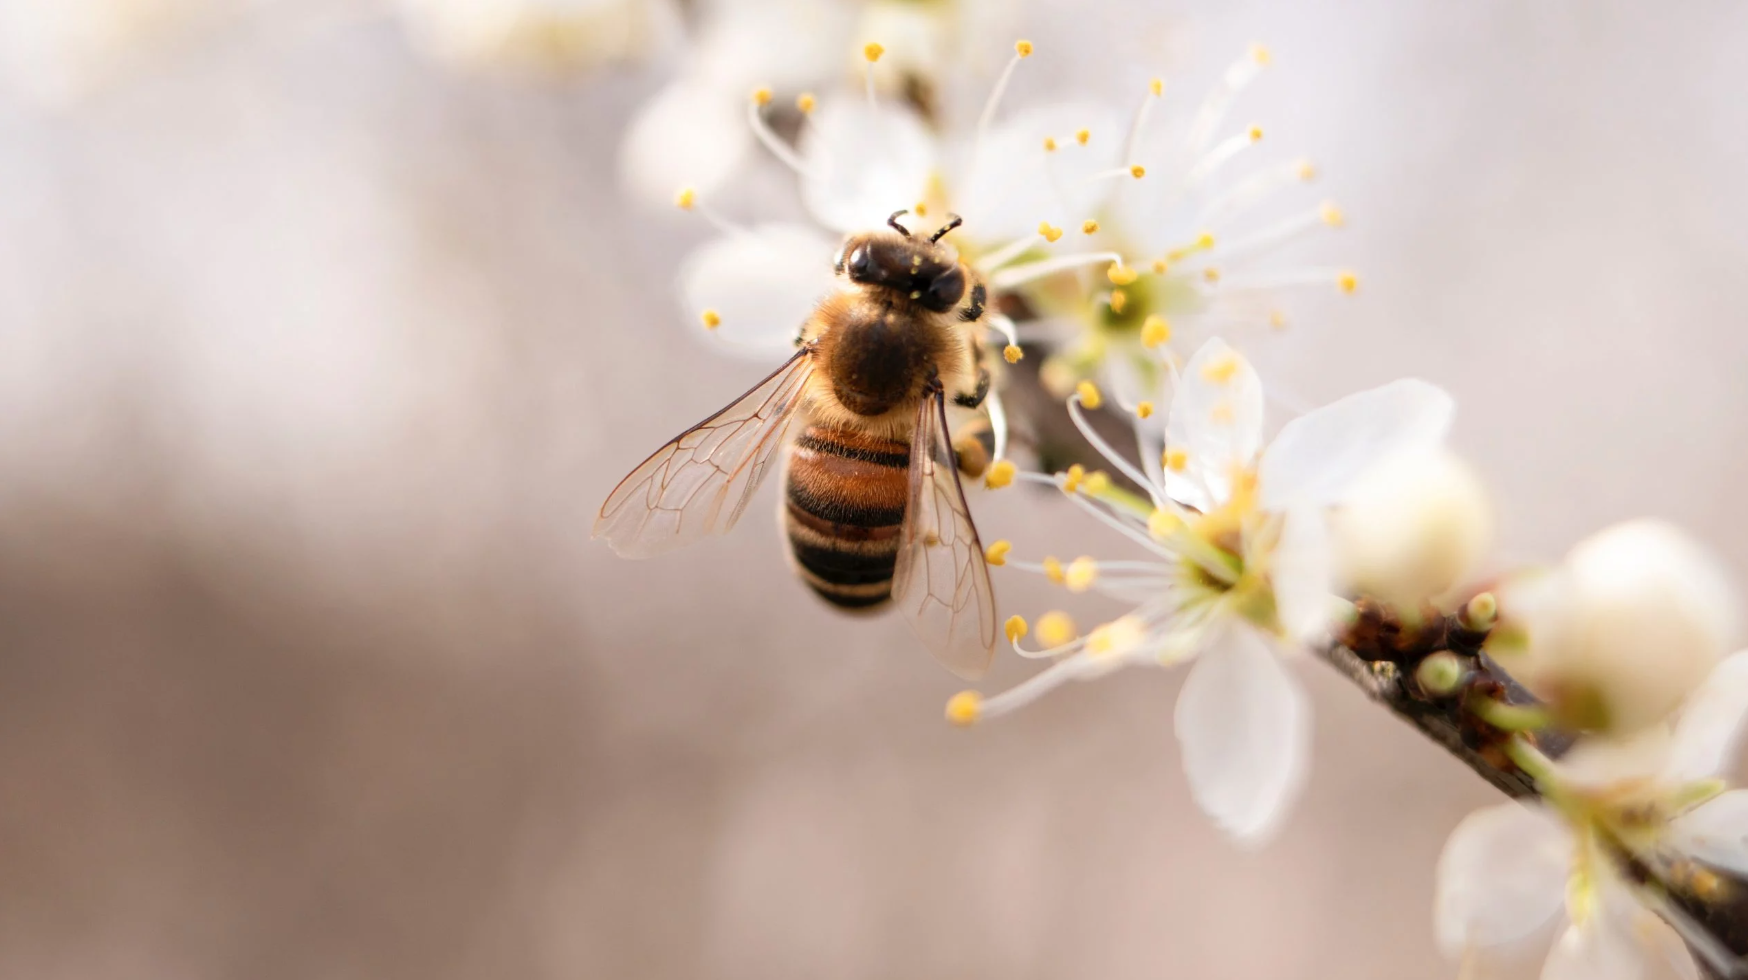 Why It’s Important to Save the Bees